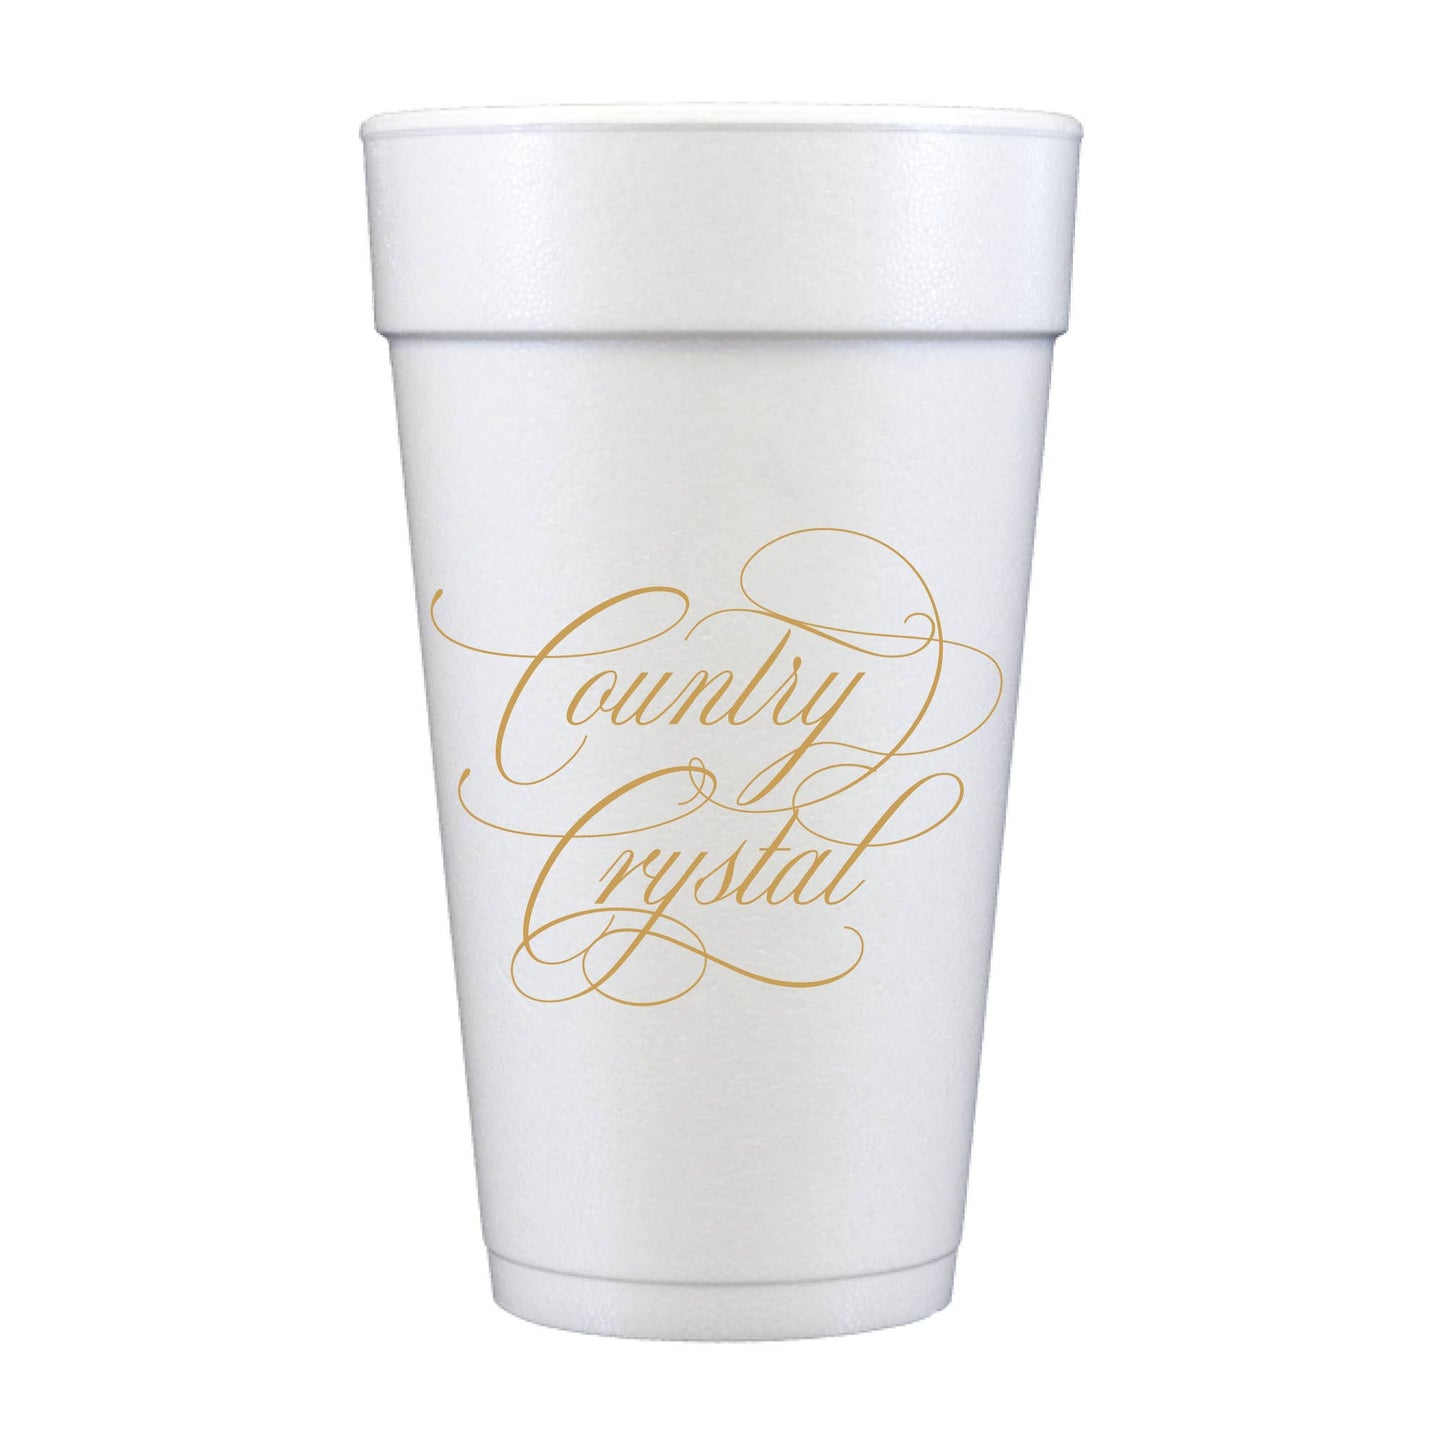 Country Crystal- Set of 10 20 oz Cups